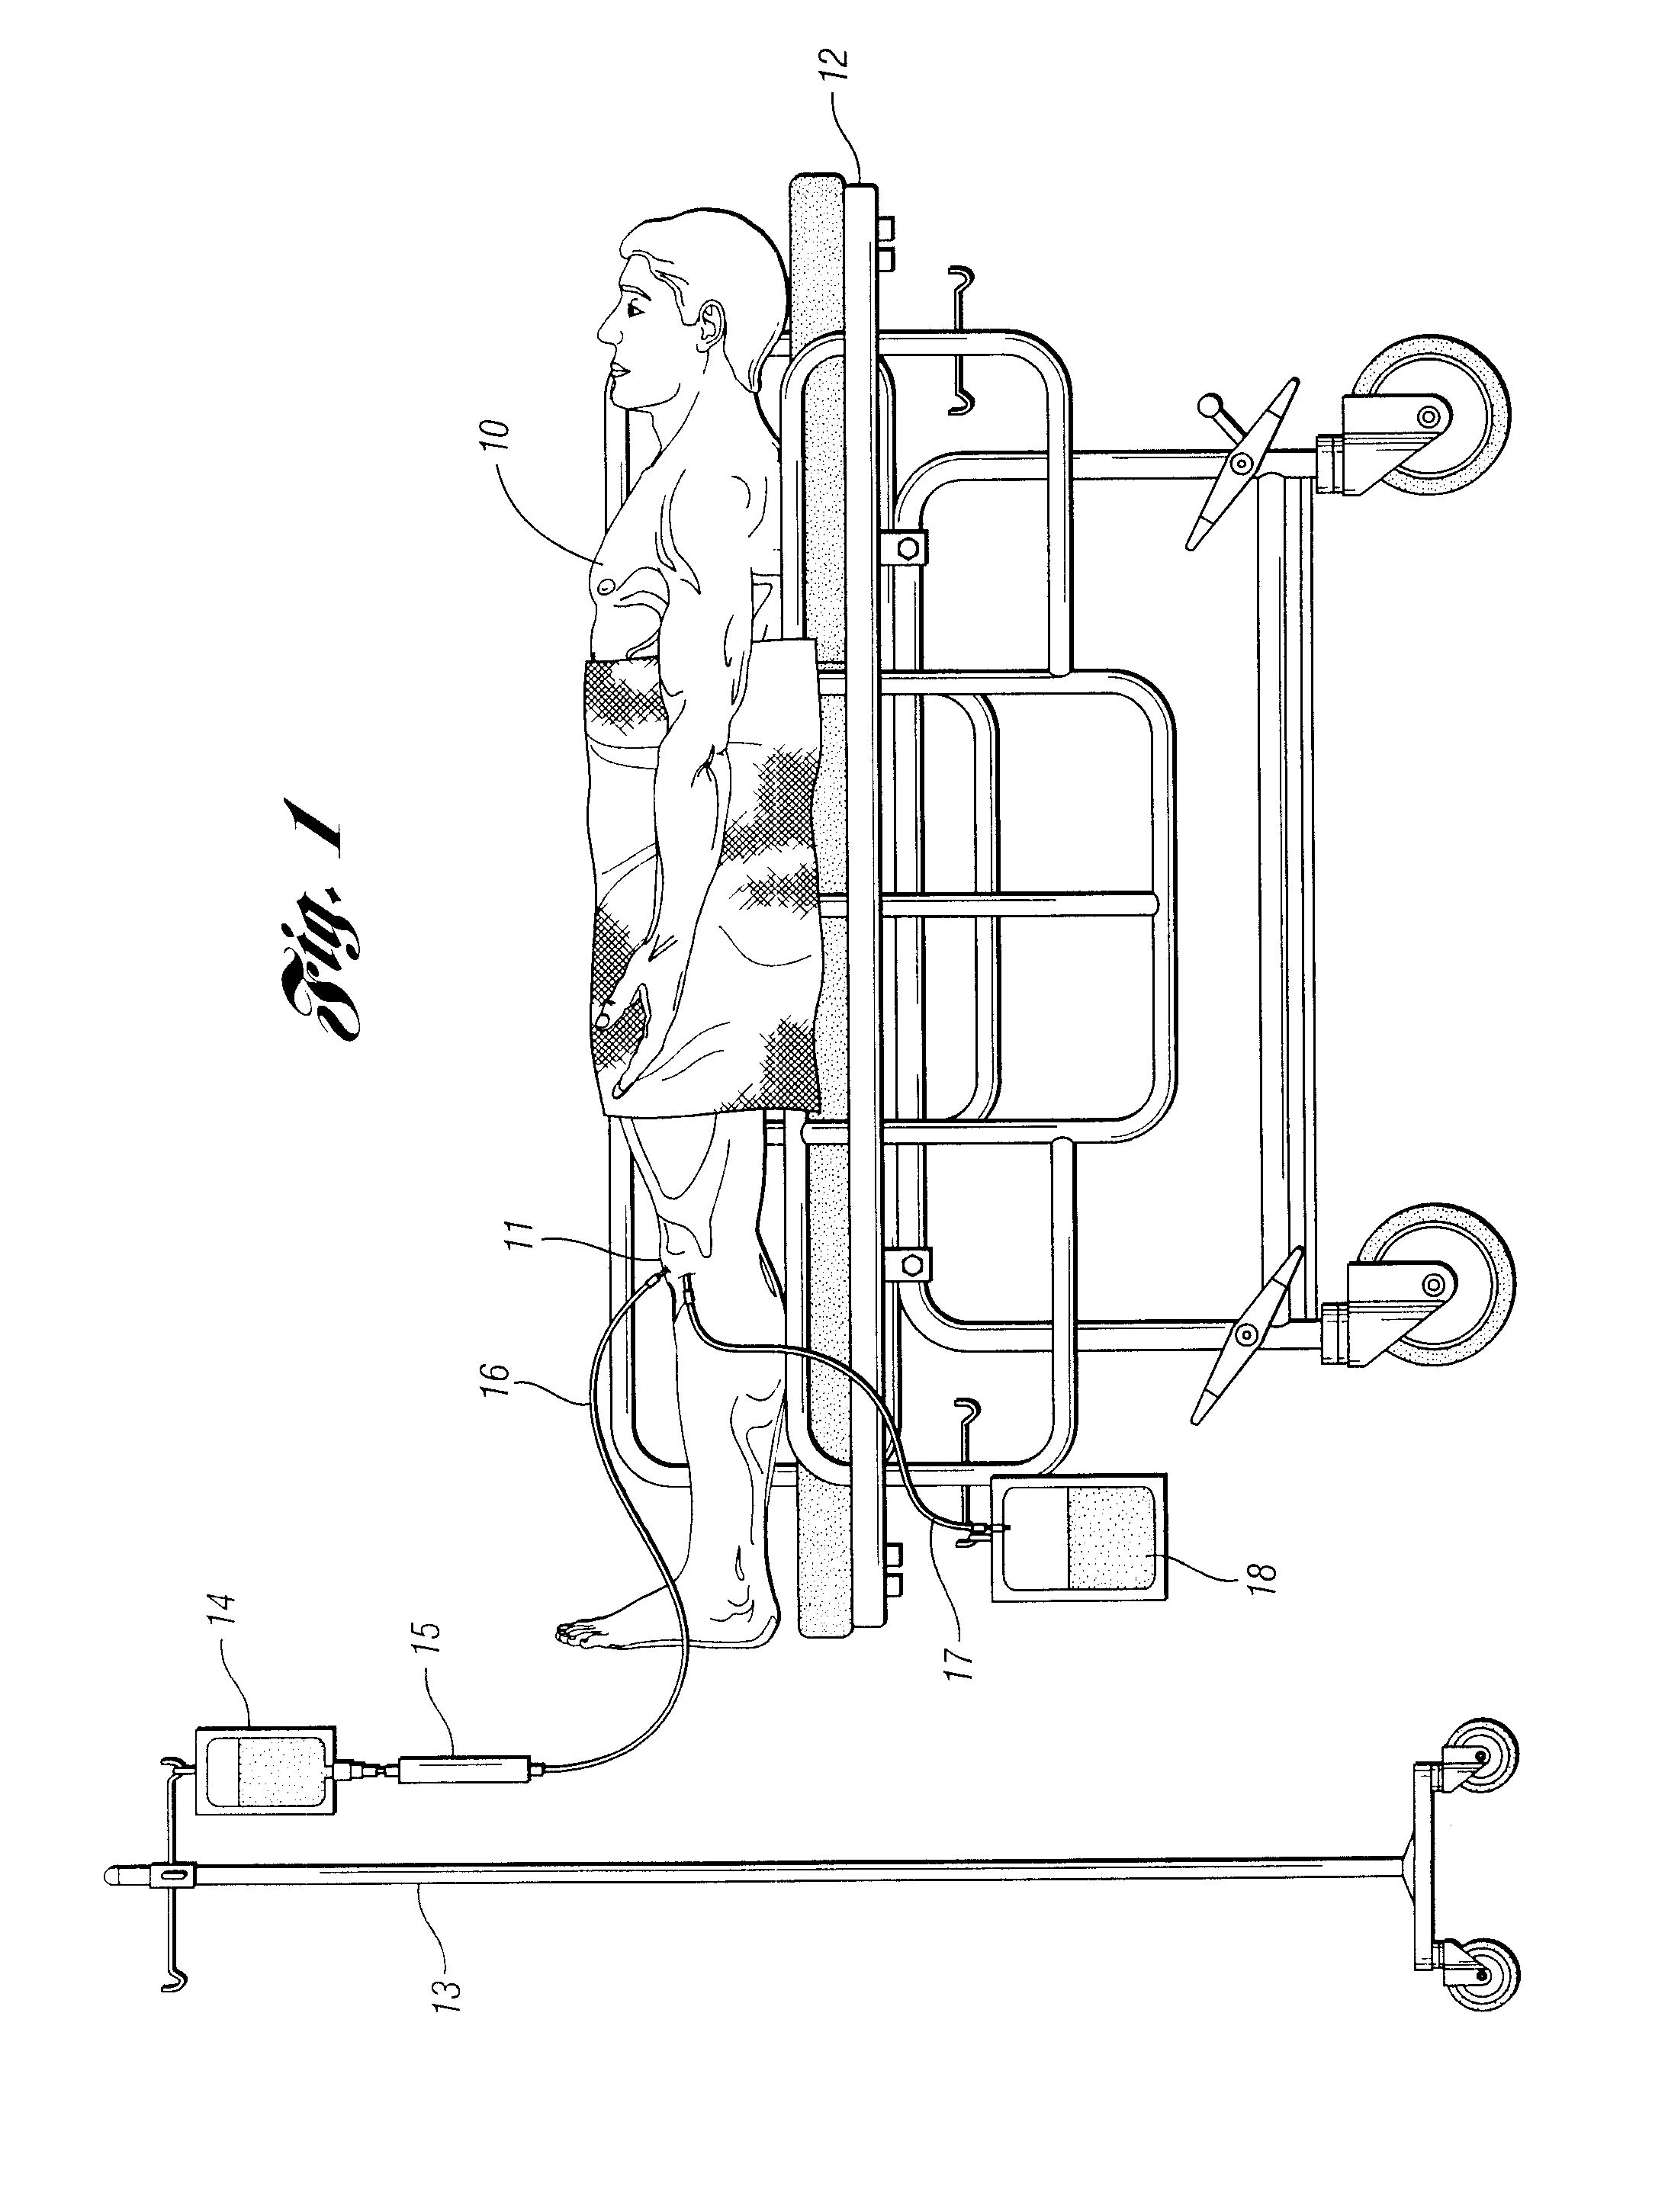 Method For Supplying Oxygenated Water To Promote Internal Healing